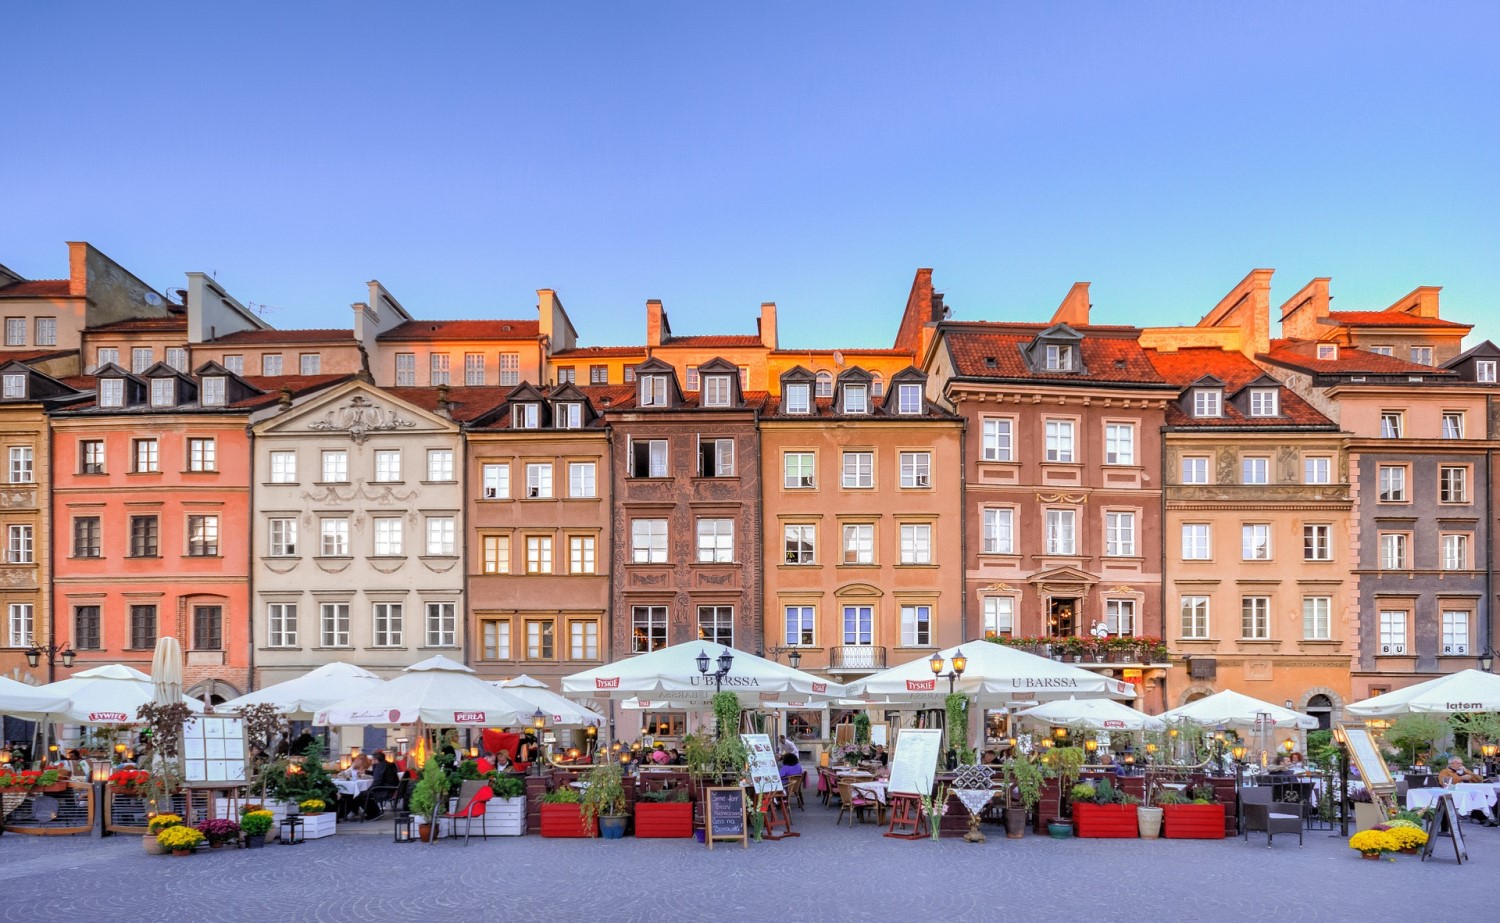 Discover Warsaw this spring, amazing destination